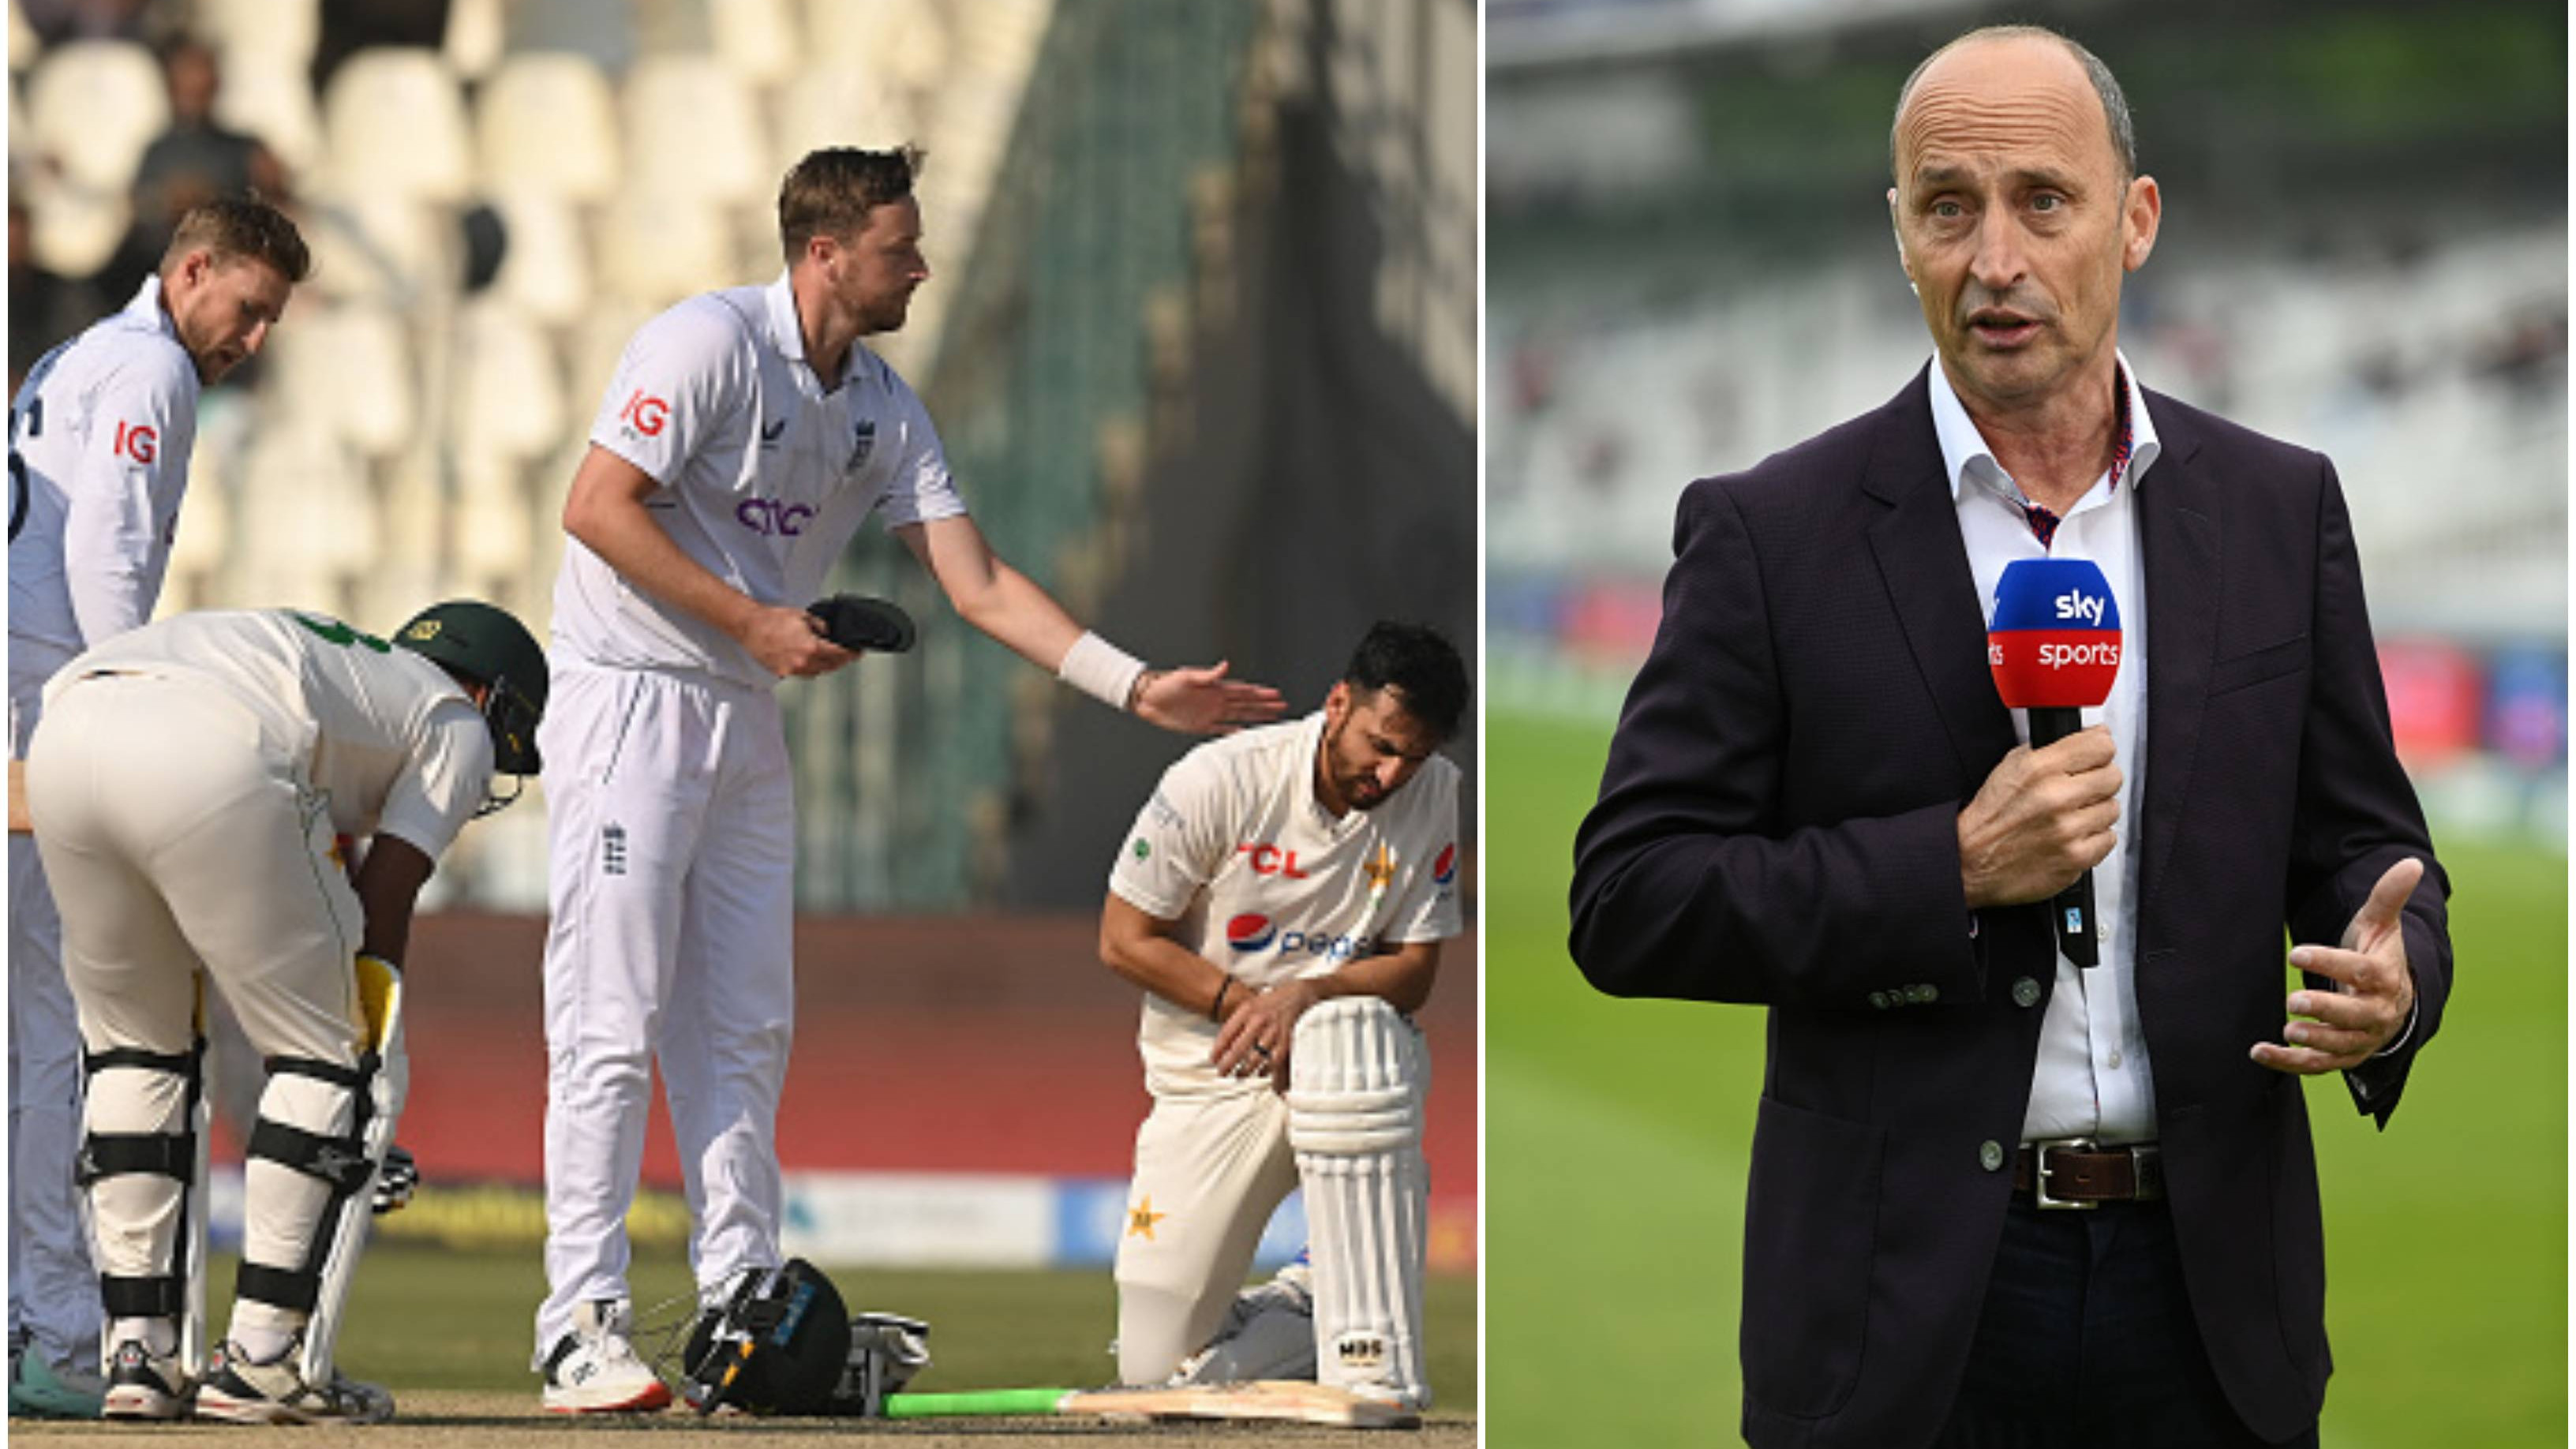 PAK v ENG 2022: “You spare a thought for Pakistan,” Nasser Hussain sympathizes with hosts for losing two close Tests